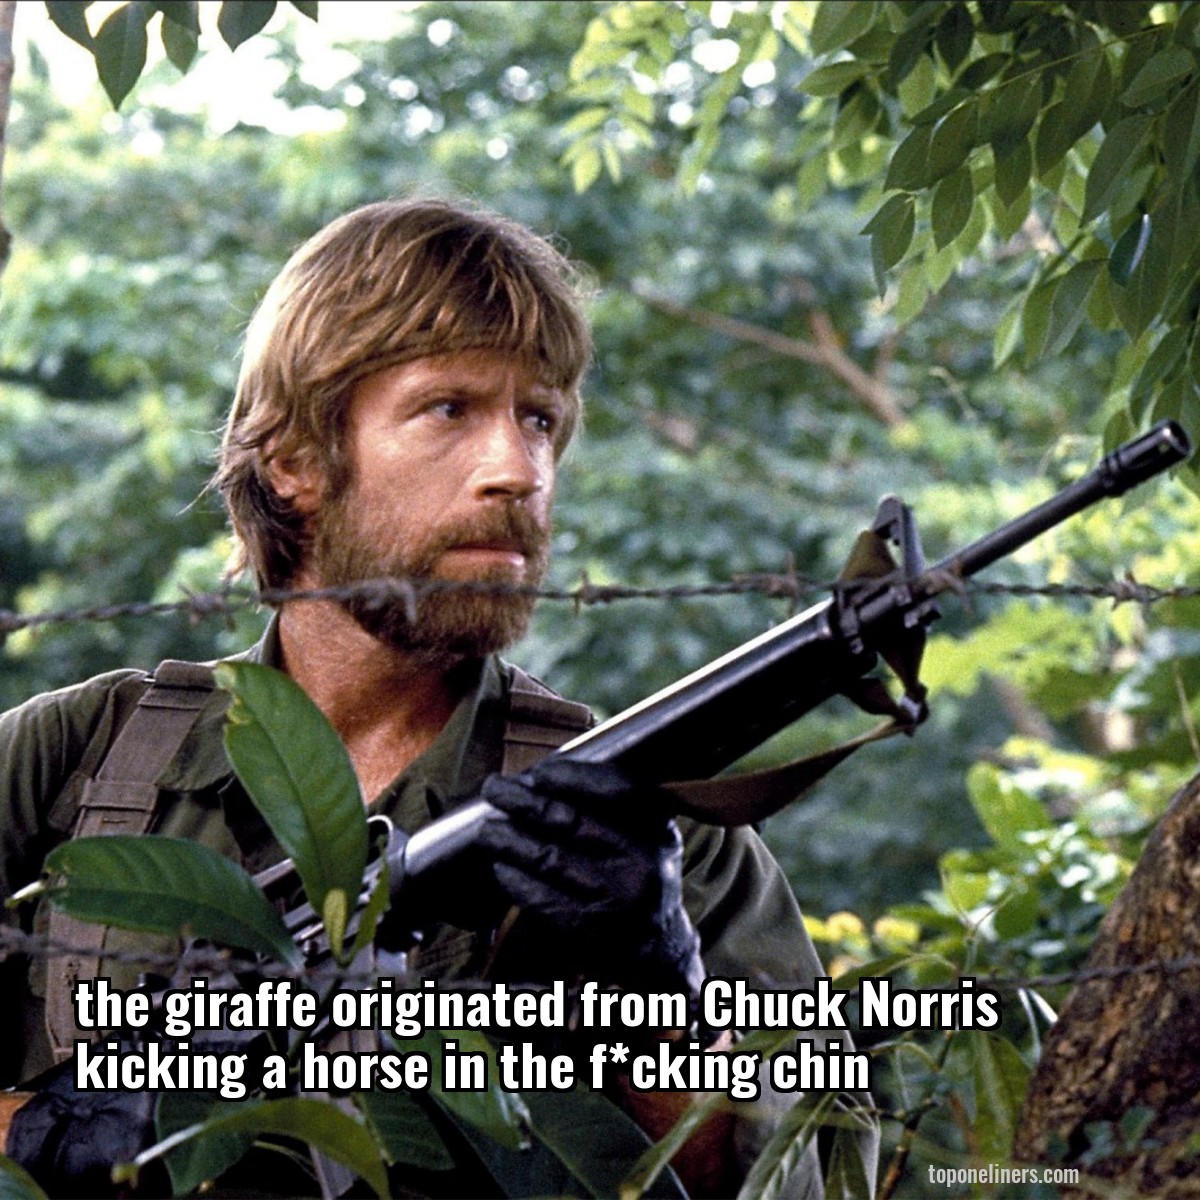 the giraffe originated from Chuck Norris kicking a horse in the f*cking chin